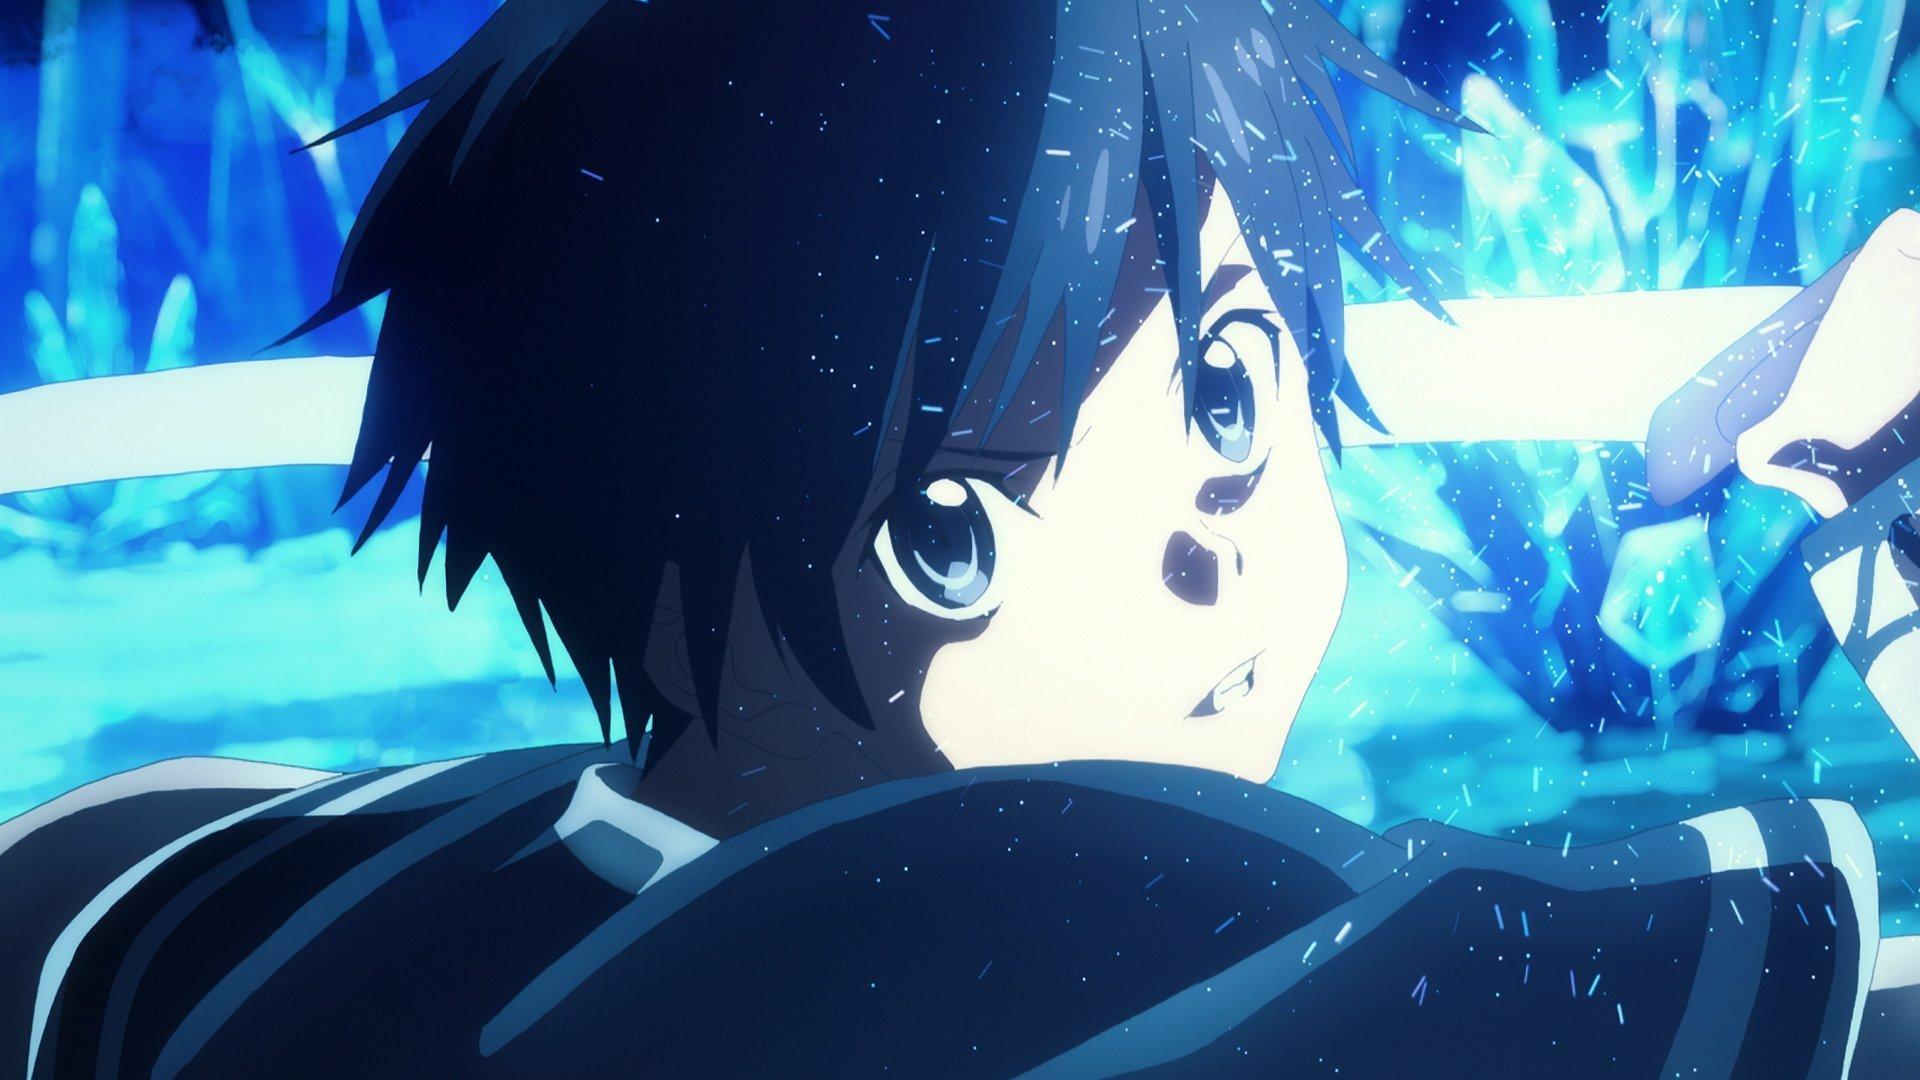 Sword Art Online: Alicization Episode 4 Synopsis and Preview Image